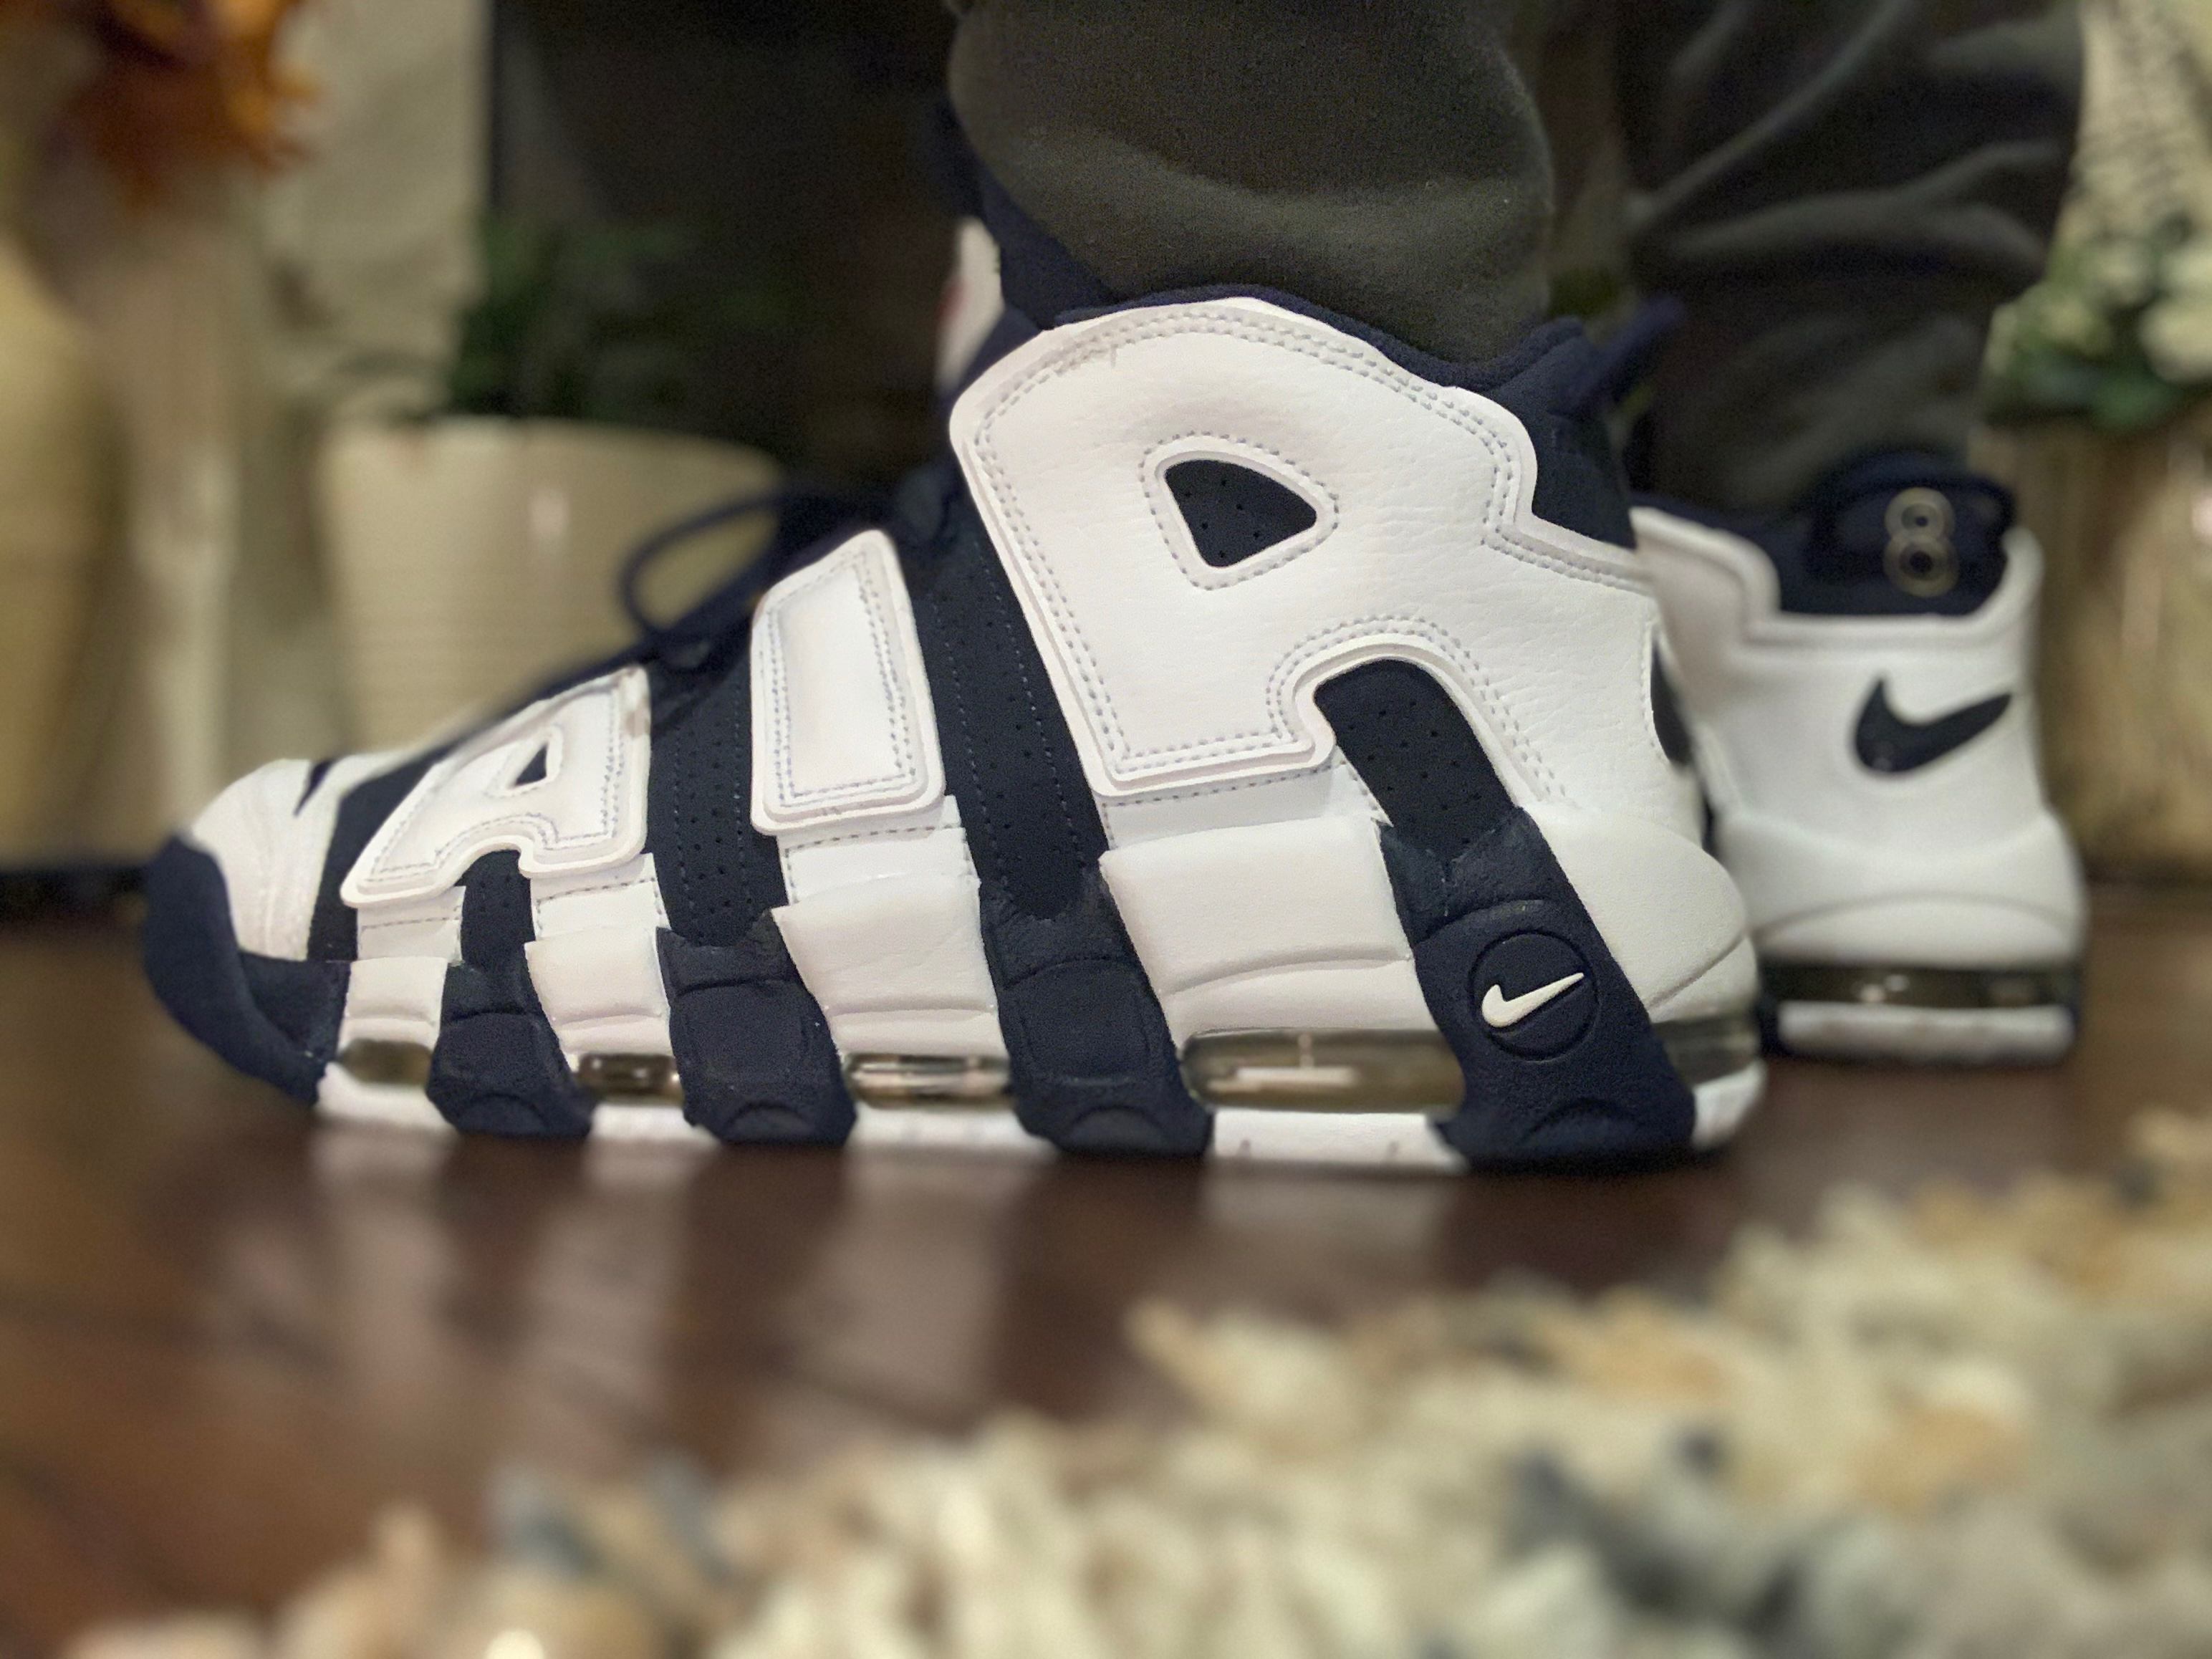 Nike Air More Uptempo - Olympic